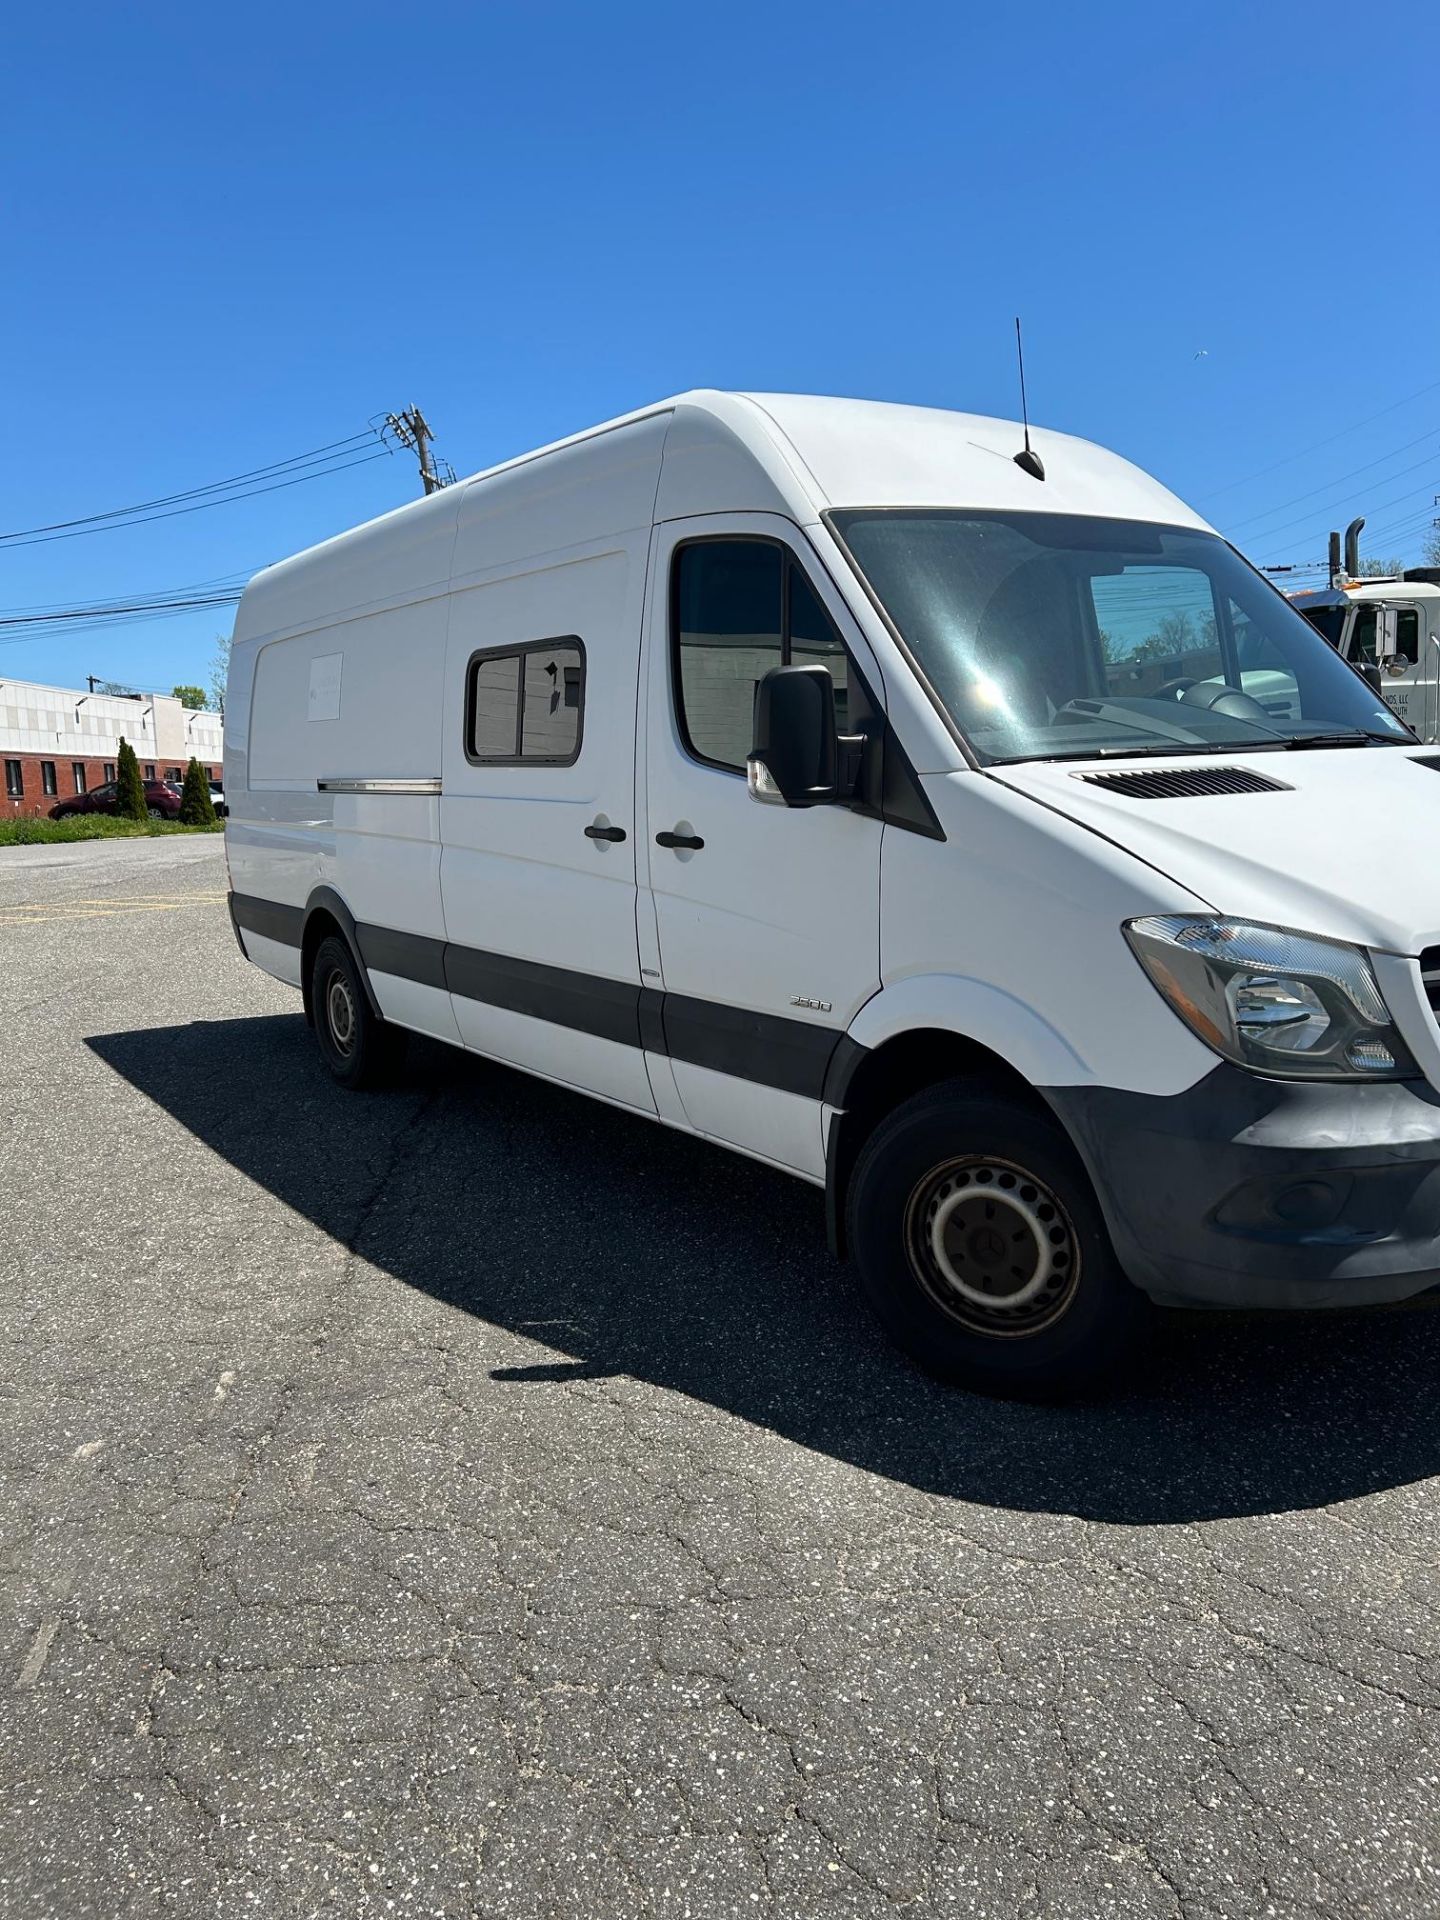 2014 Mercedes Diesel Cargo Van, Automatic Transmission, Approx. 48899 Miles. - Image 8 of 9